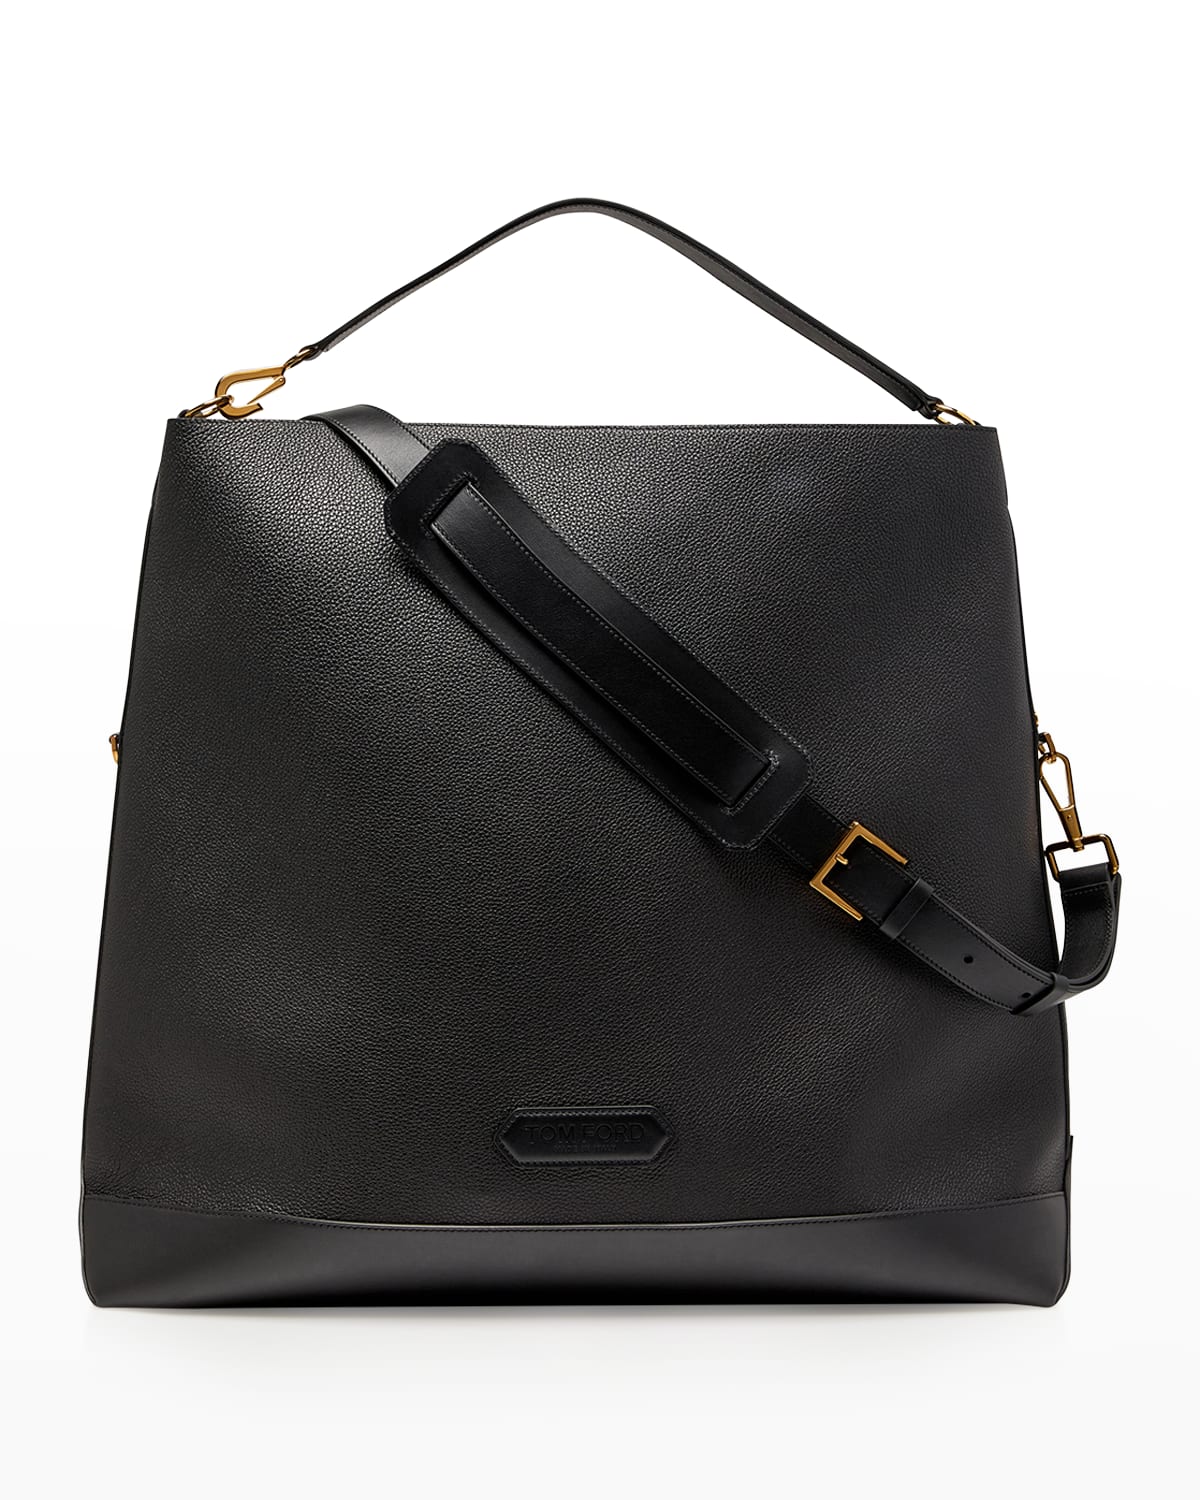 Tom Ford Tote Bag | Neiman Marcus